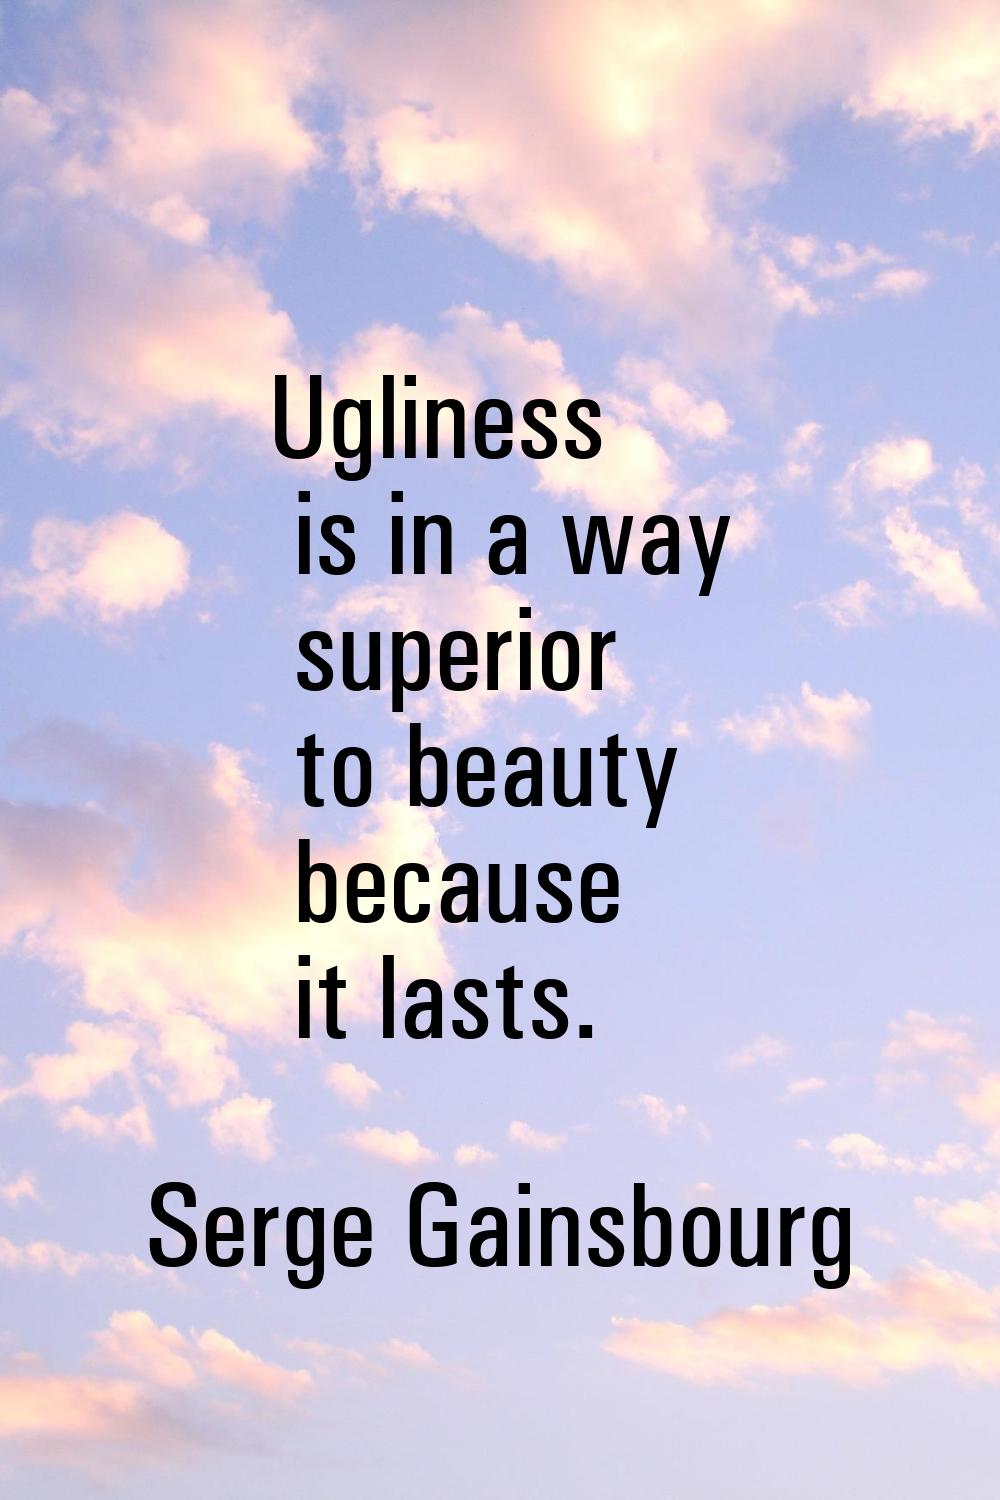 Ugliness is in a way superior to beauty because it lasts.